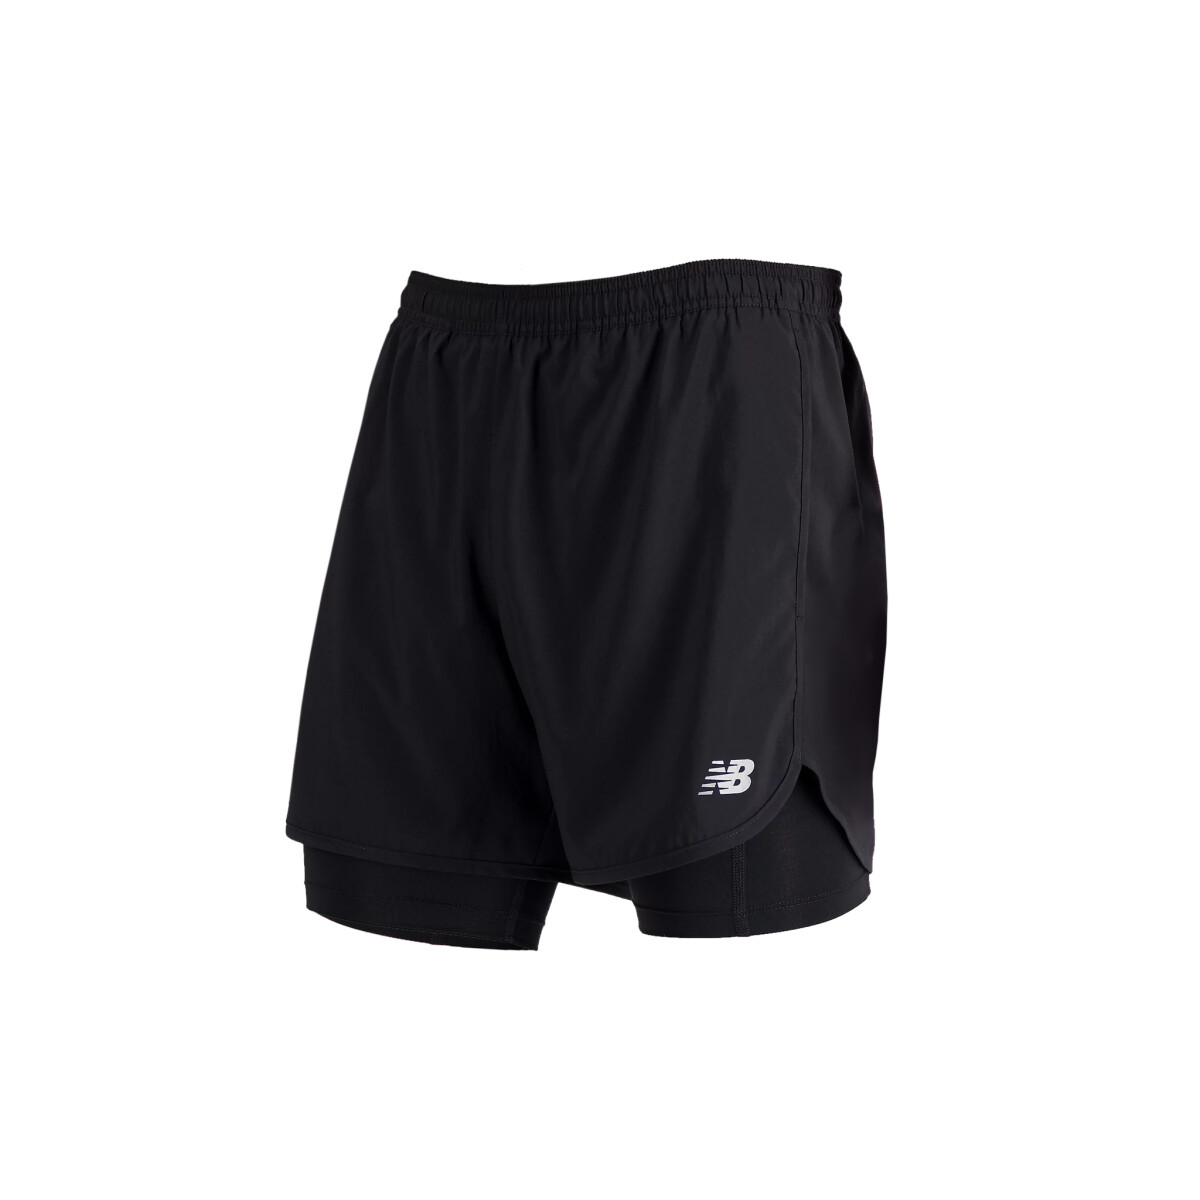 Short New Balance ACCELERATE PACER 5 INCH 2-IN-1 - BLACK 